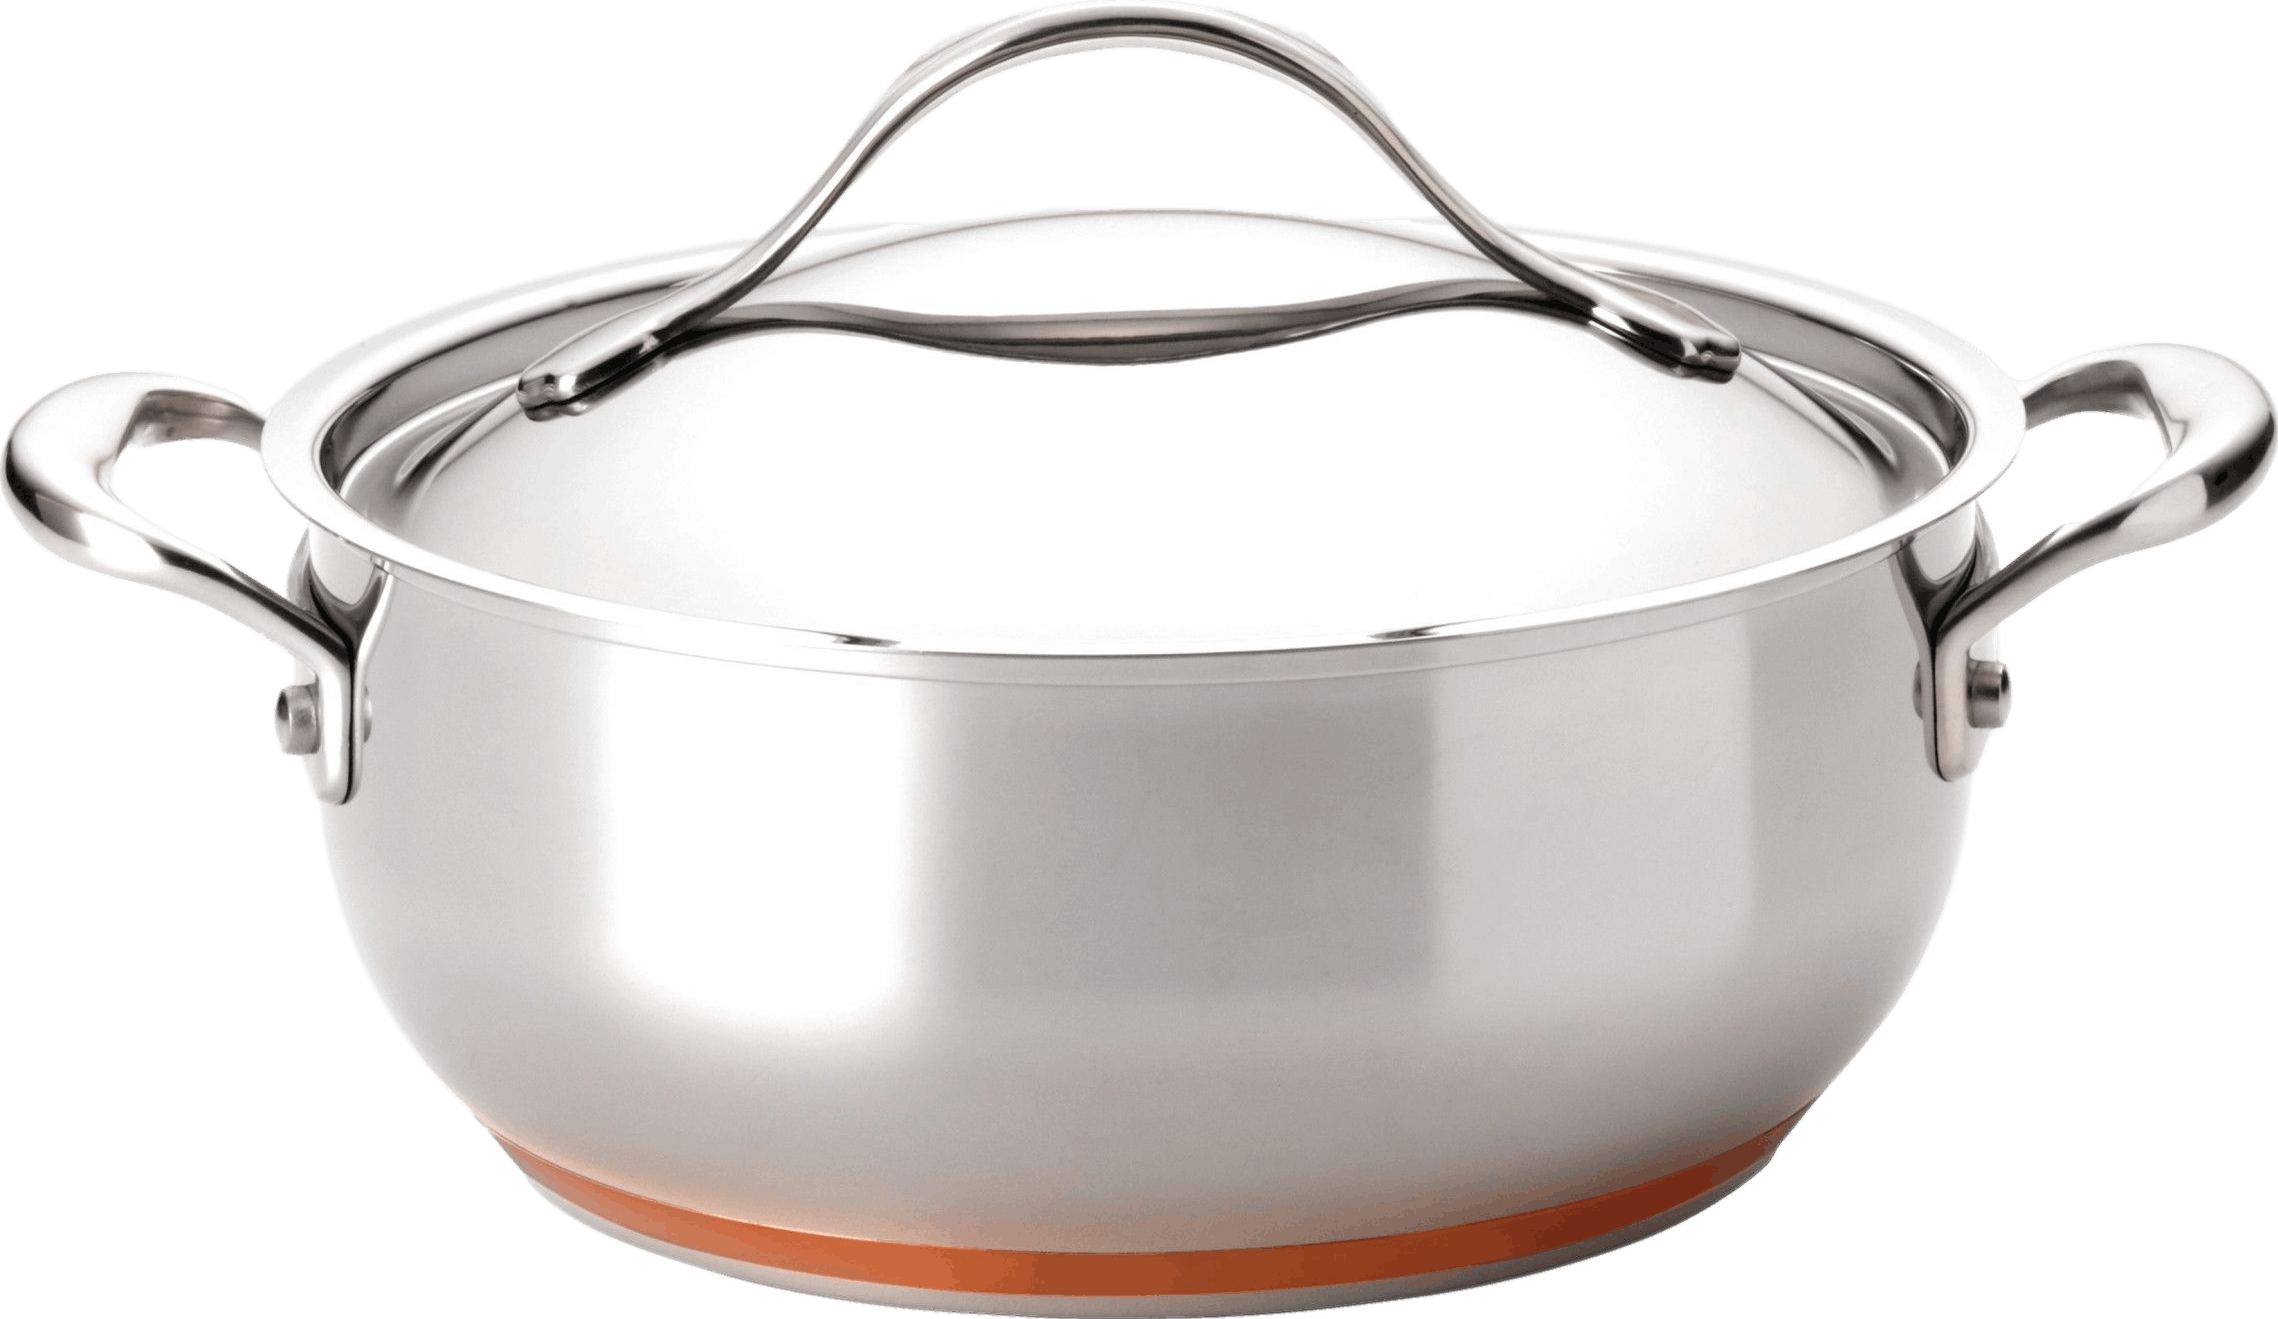 Anolon Nouvelle Copper Stainless Steel Induction Chef and Casserole Pan with Lid, 4-Quart, Silver